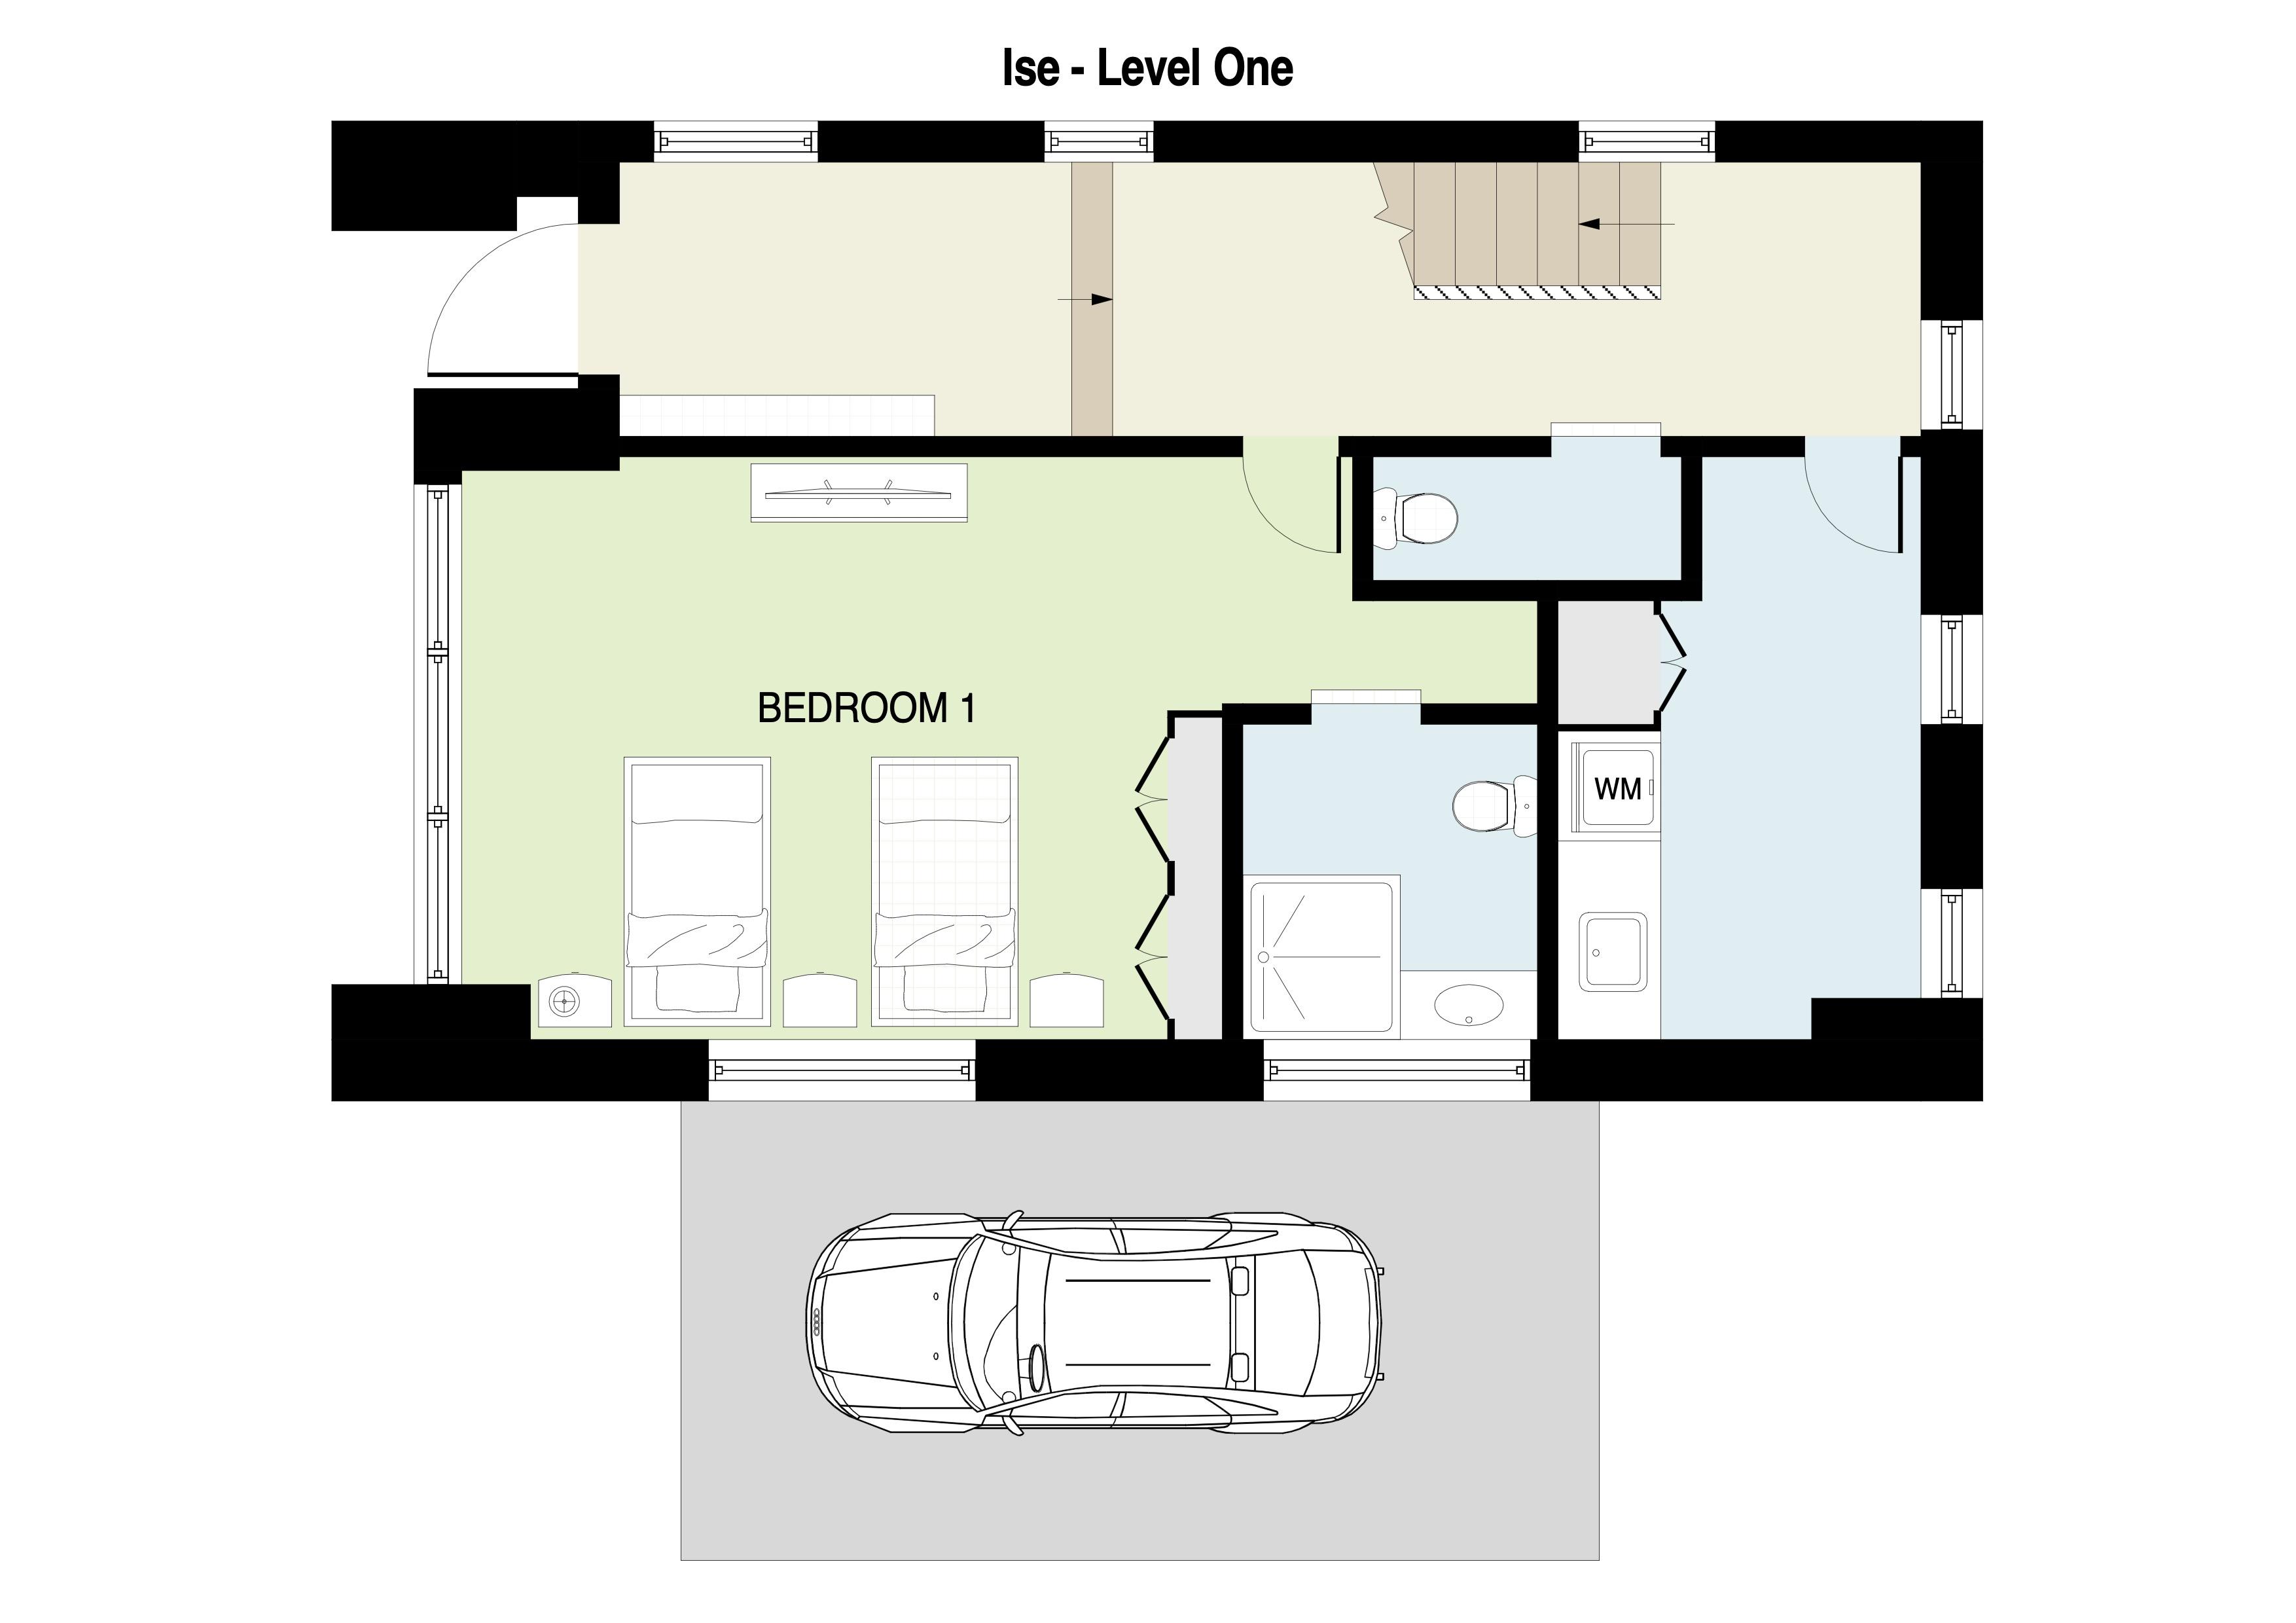 Ise first floor plan